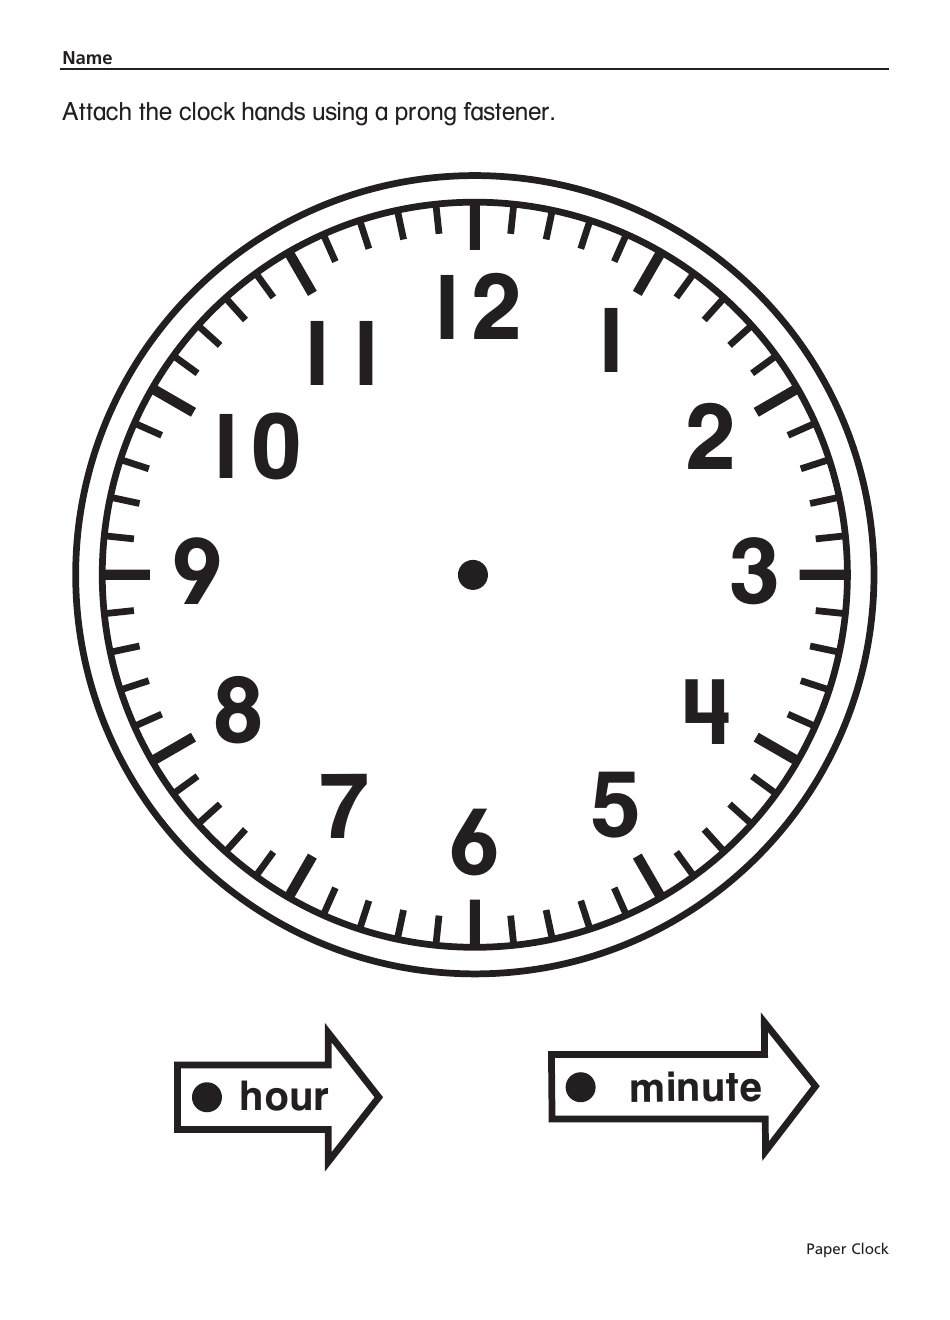 Paper clock template with hands